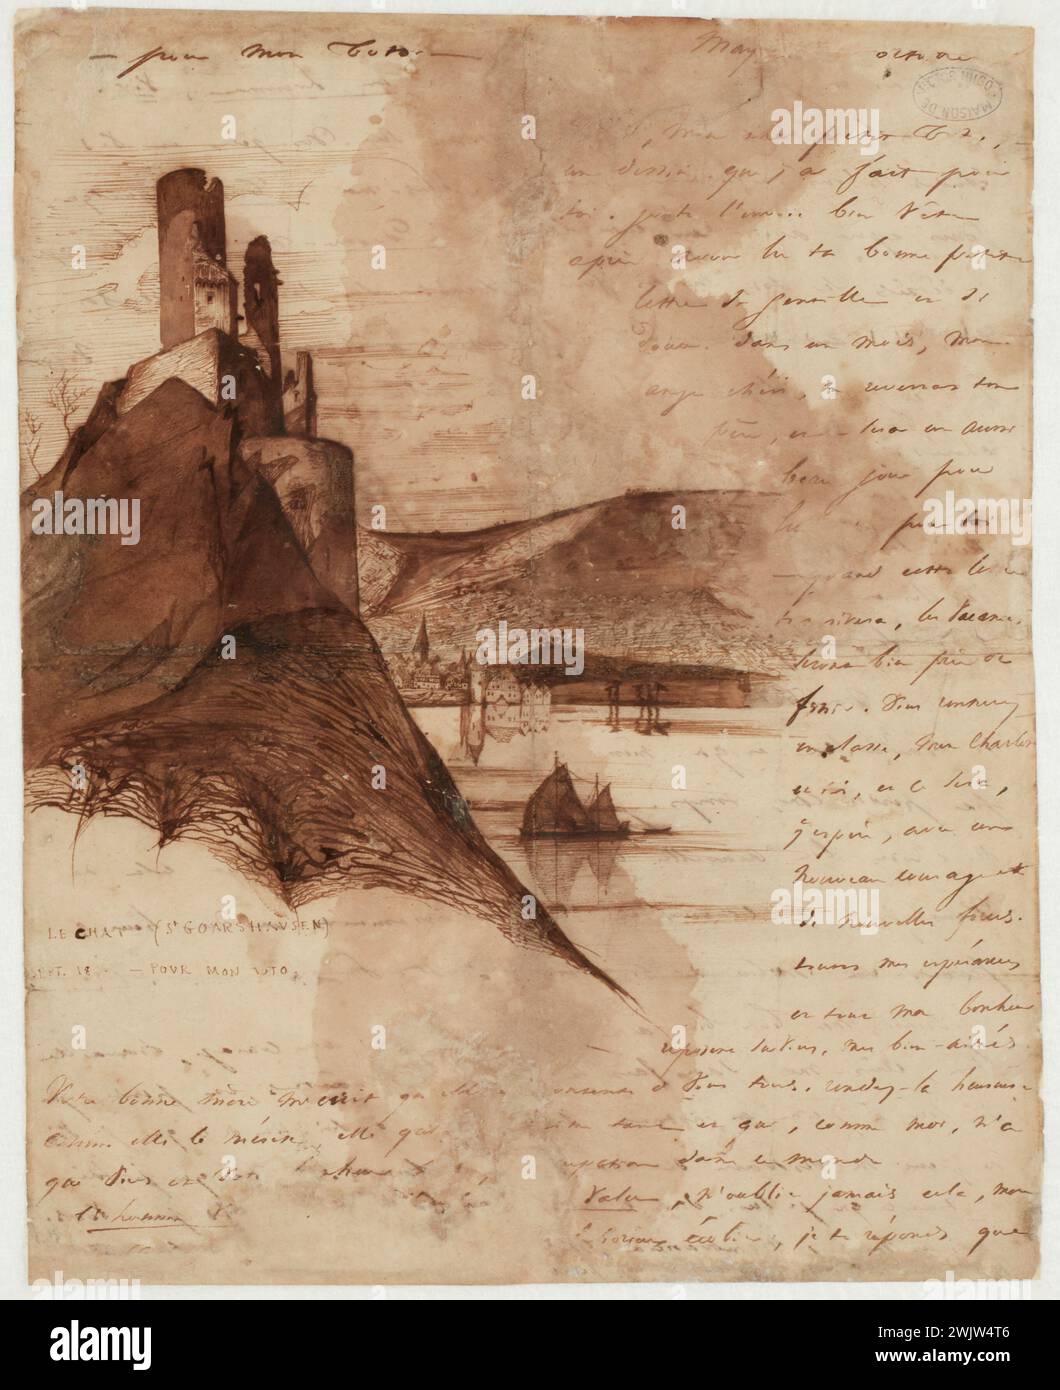 Hugo, Victor (n.1802-02-26-D.1885-05-22), Le Chat (title given by the author), 1840-09. Plume and brown ink wash, graphite pencil (?) On woven paper. House of Victor Hugo - Hauteville House. Represents the Château du Katz (Burg Katz) overlooking the Rhine and the German city of Sankt Goarshausen in Rhineland-Palatinate. This castle built around 1371 by Guillaume II of Katzenelnbogen was then in ruins, bombed in 1806, it was only rebuilt between 1896 and 1898. Stock Photo